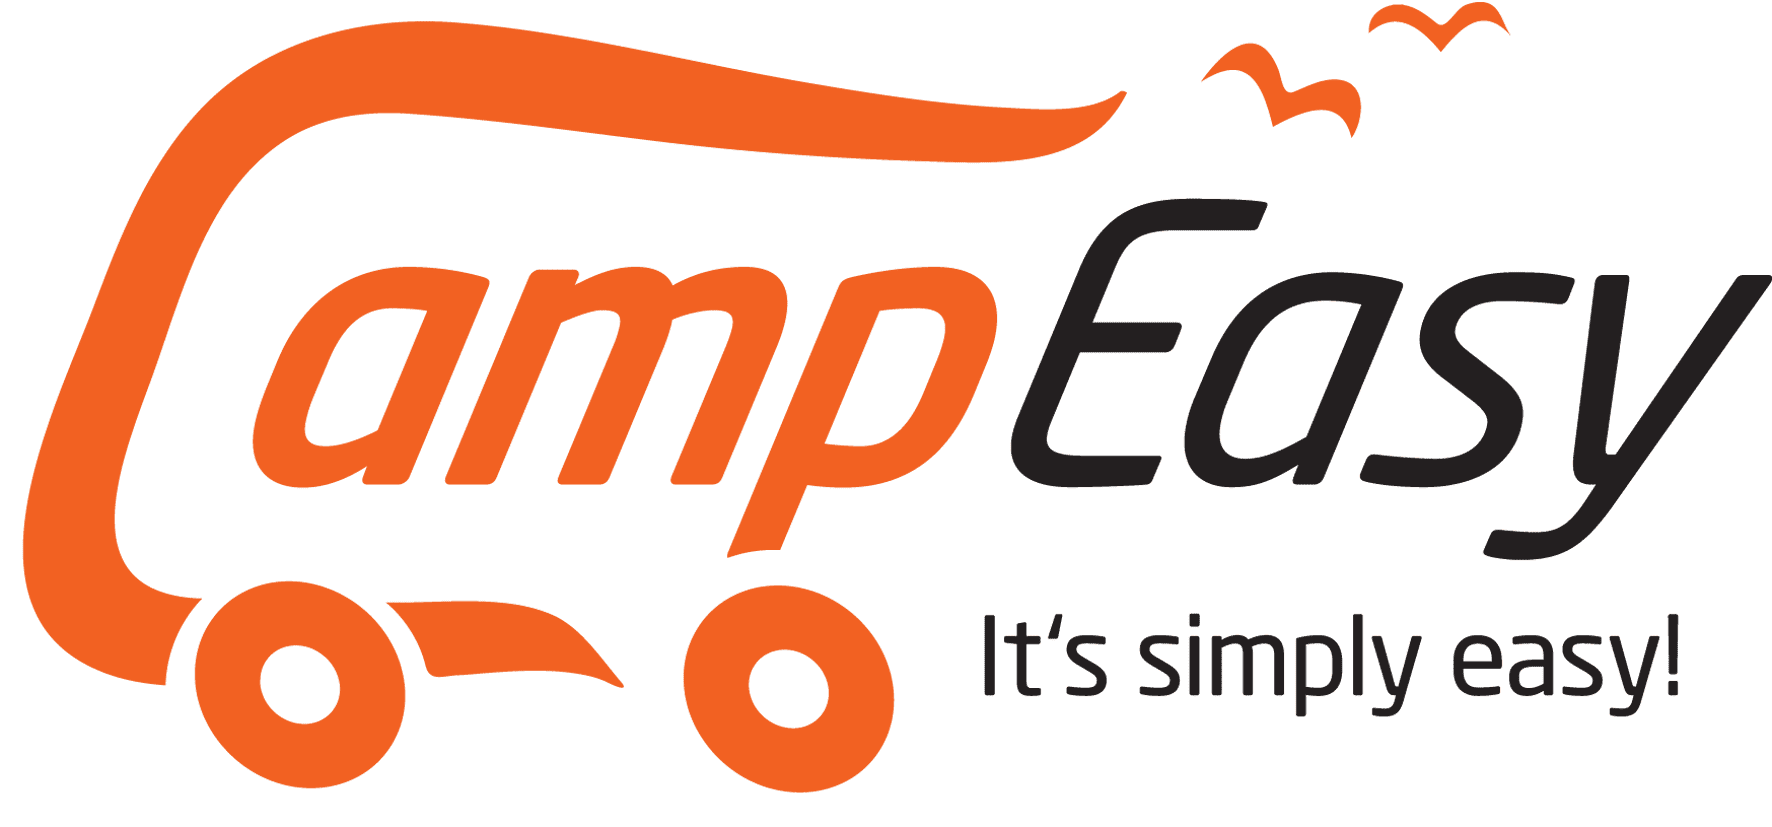 Transport to CampEasy via the Easy Shuttle - Schedule Transportation